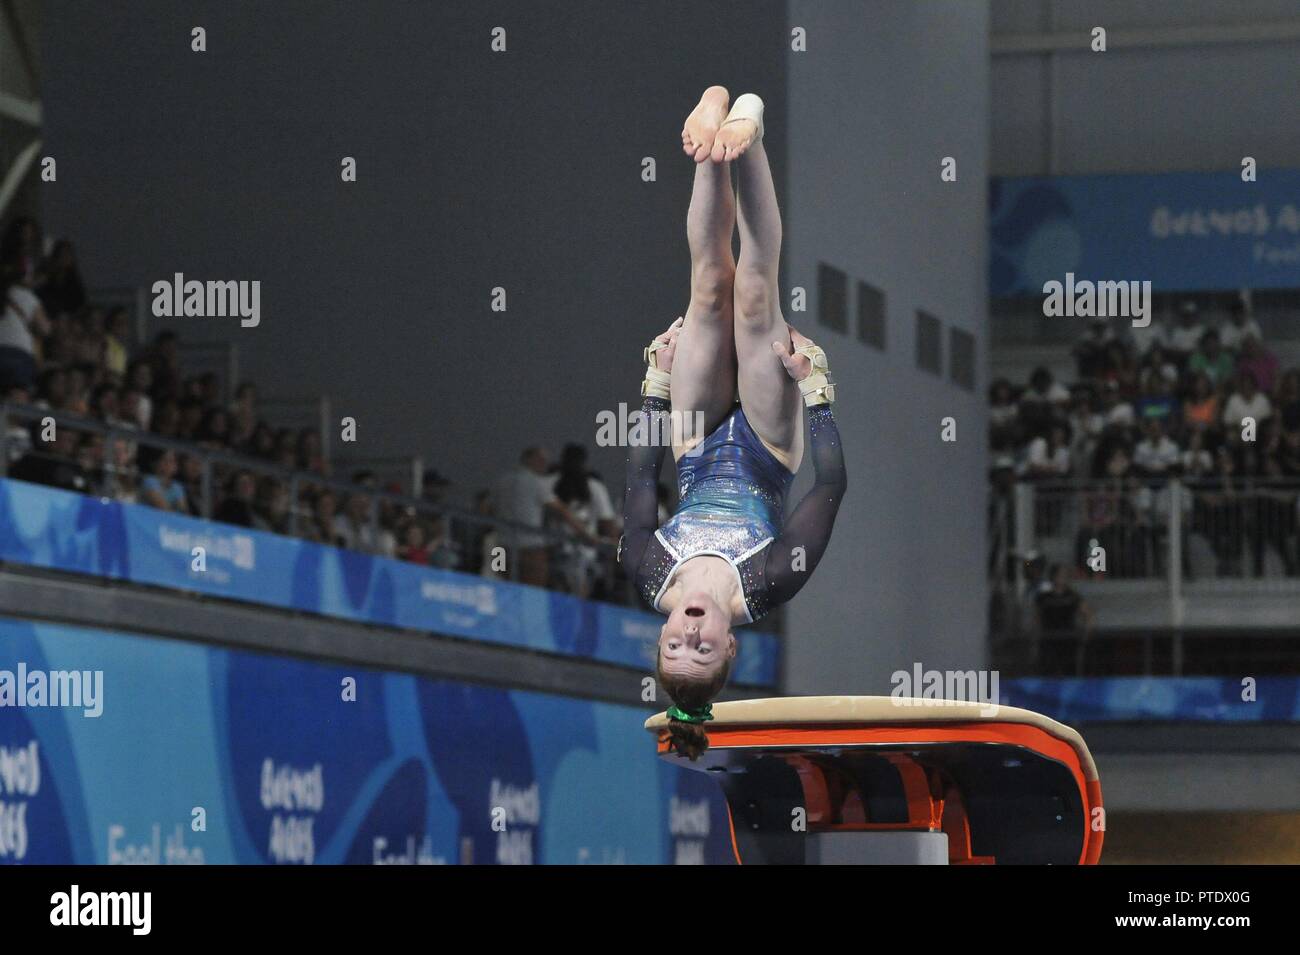 Buenos Aires, Buenos Aires, Argentina. 8th Oct, 2018. EMMA SLEVIN of Ireland competes during the Women's Vault Qualification on Day 2 of the Buenos Aires 2018 Youth Olympic Games at the Olympic Park. Credit: Patricio Murphy/ZUMA Wire/Alamy Live News Stock Photo